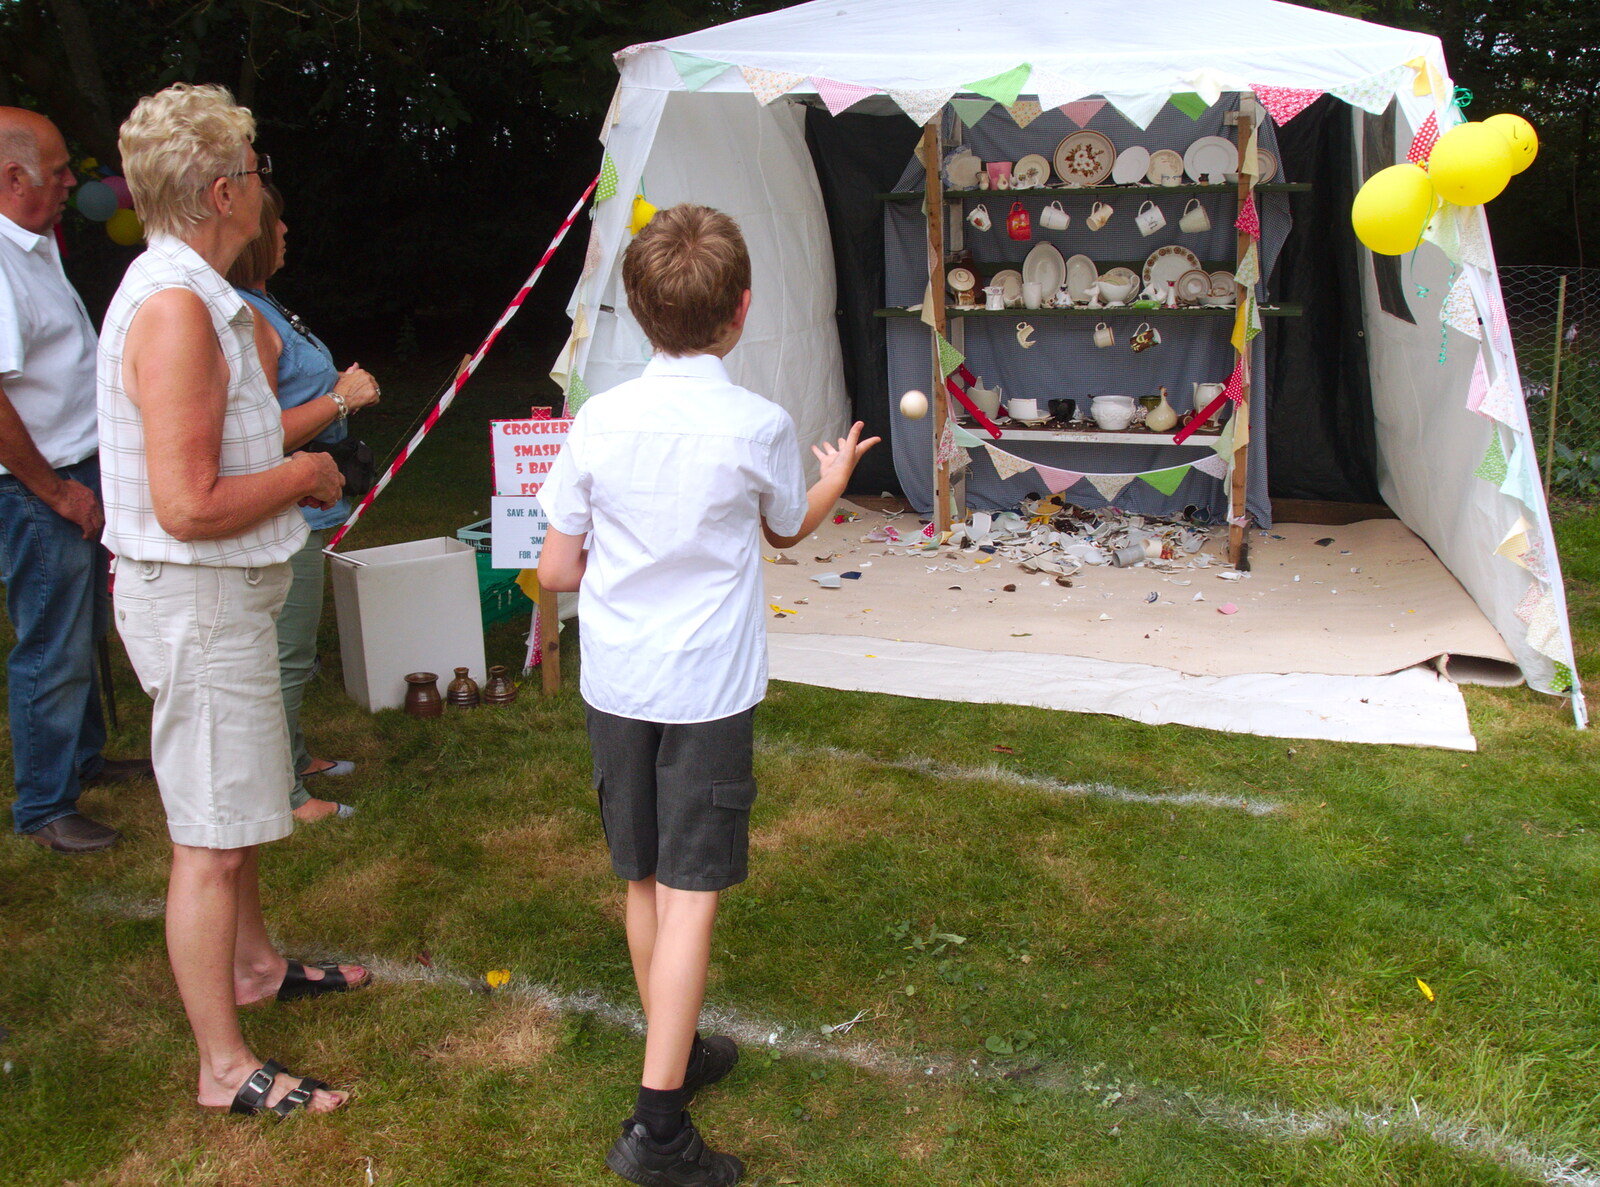 Fred has a go at the crockery smash from GSB at the Summer Fete, Market Weston, Suffolk - 20th July 2019